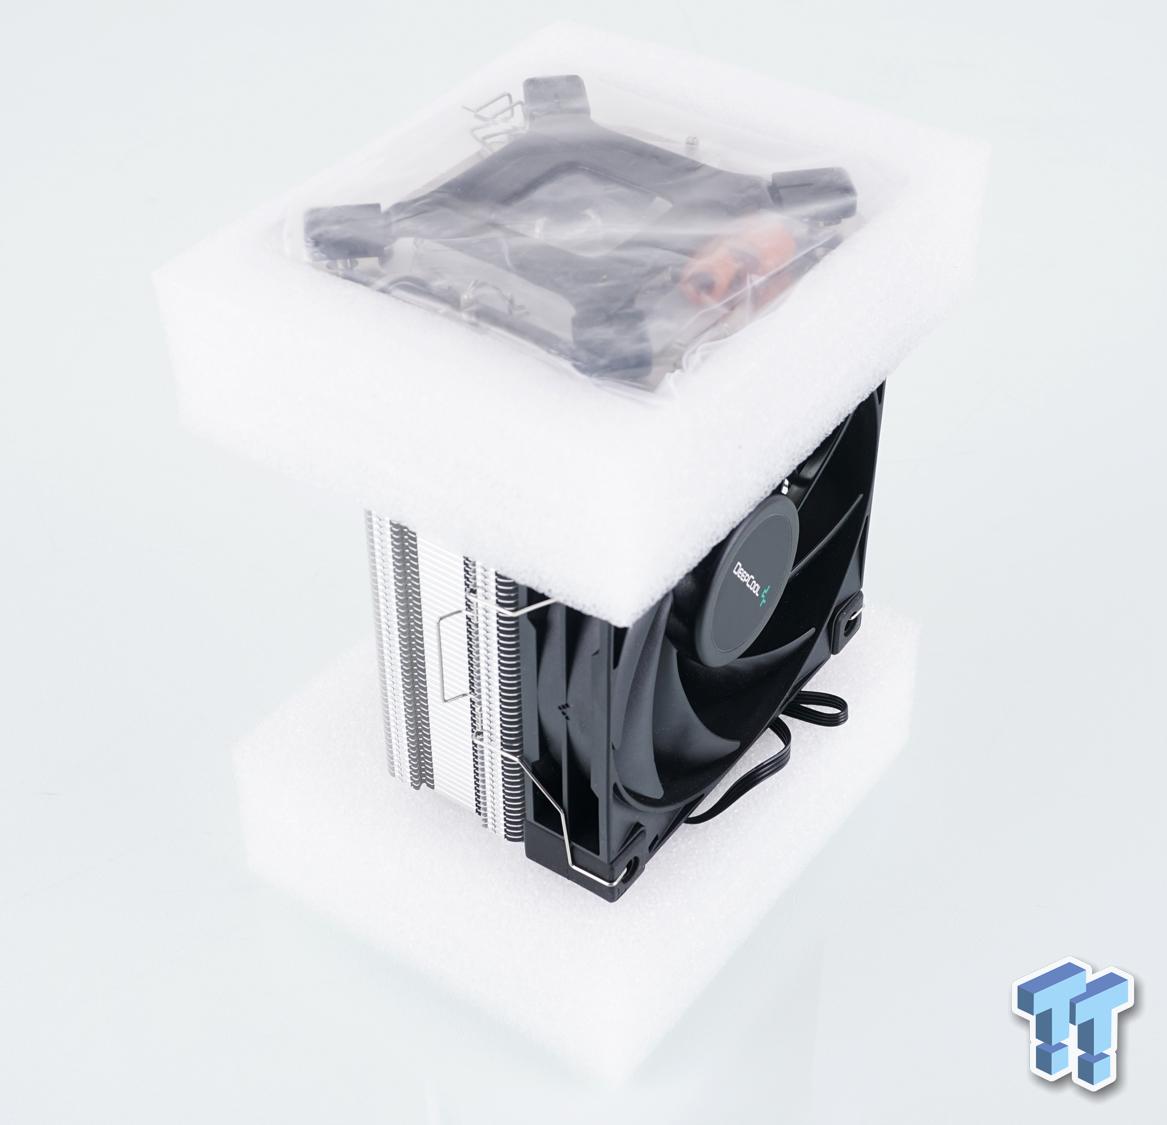 DeepCool AK400 in the test: The new air cooler in the midfield